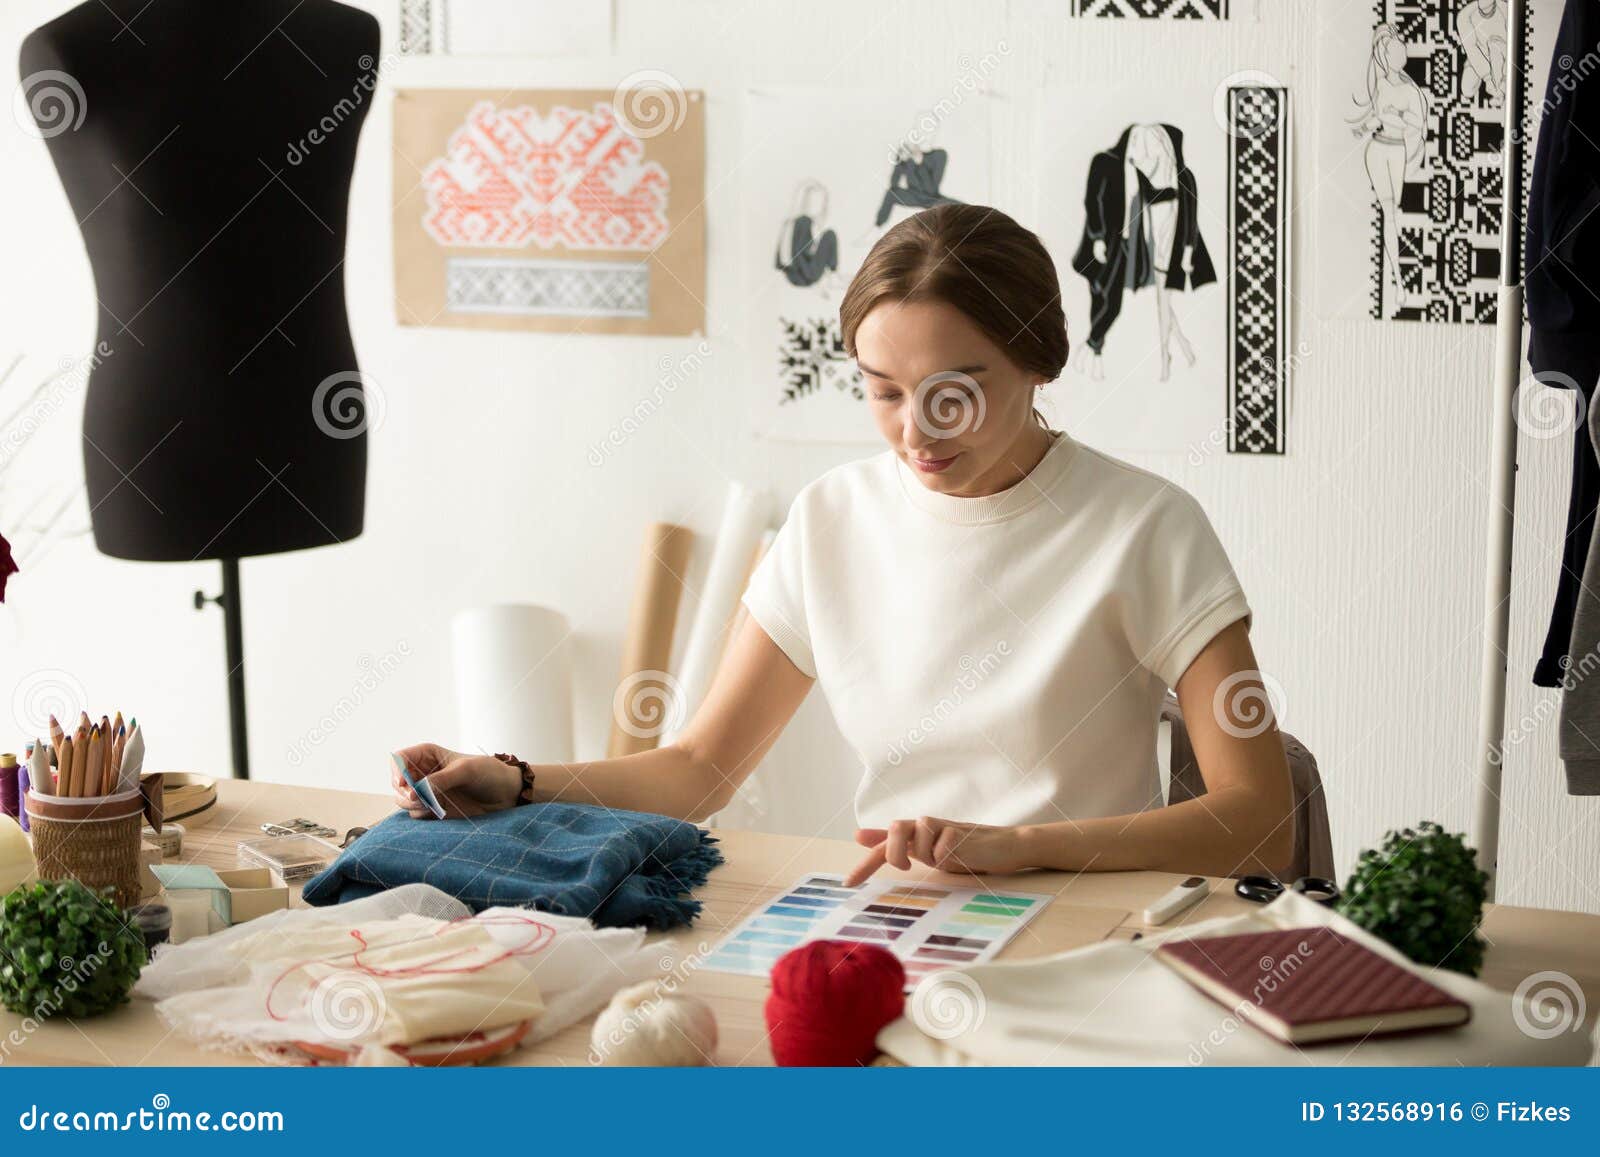 Female Clothes Designer Working with Samples in Workshop Stock Photo ...